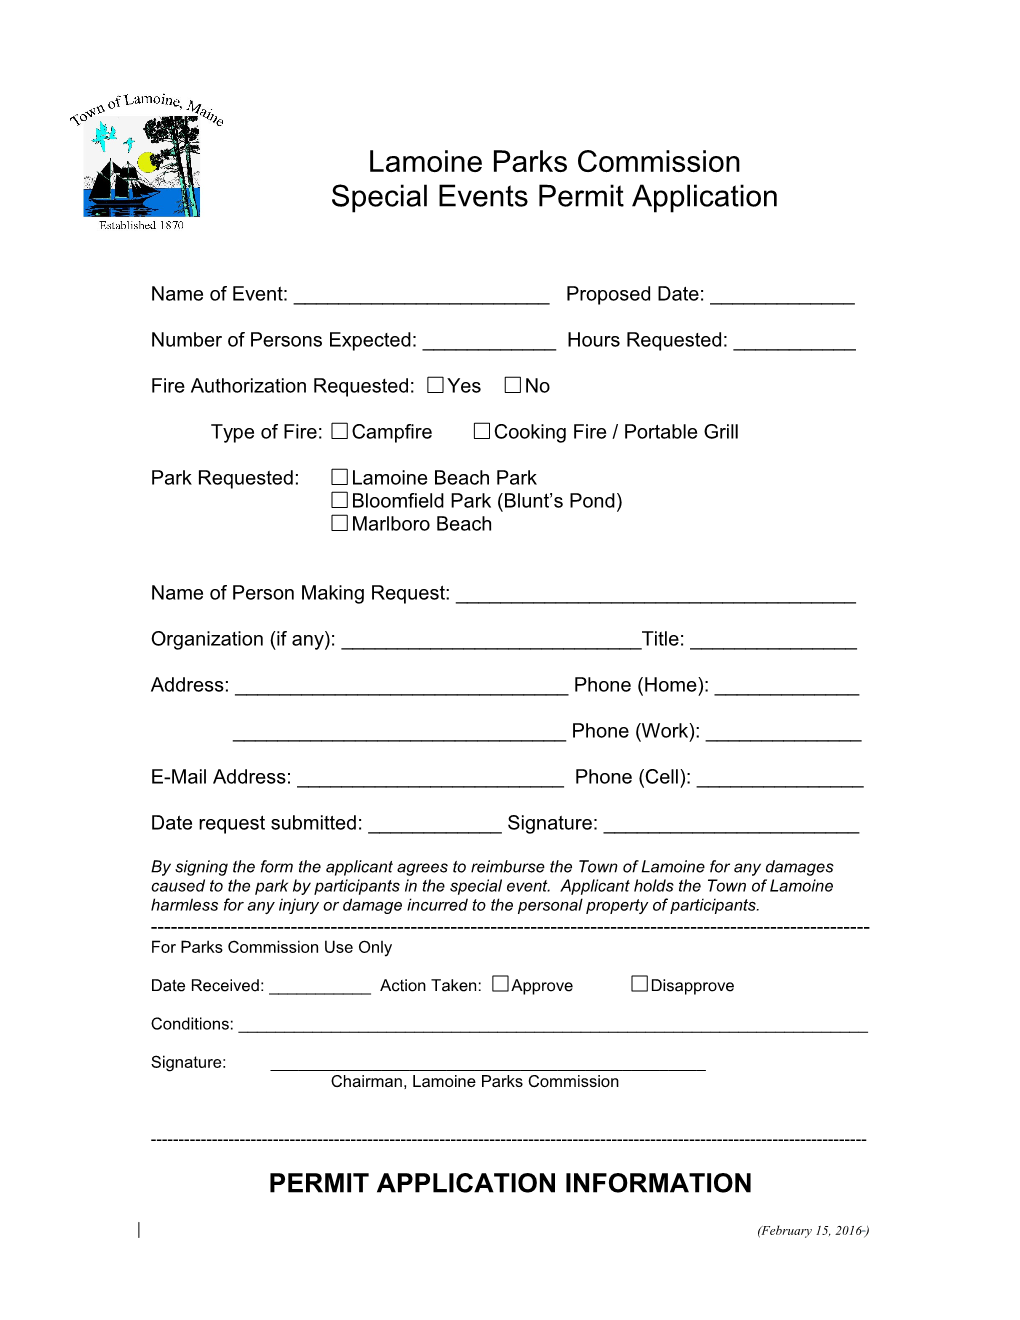 Special Events Permit Application